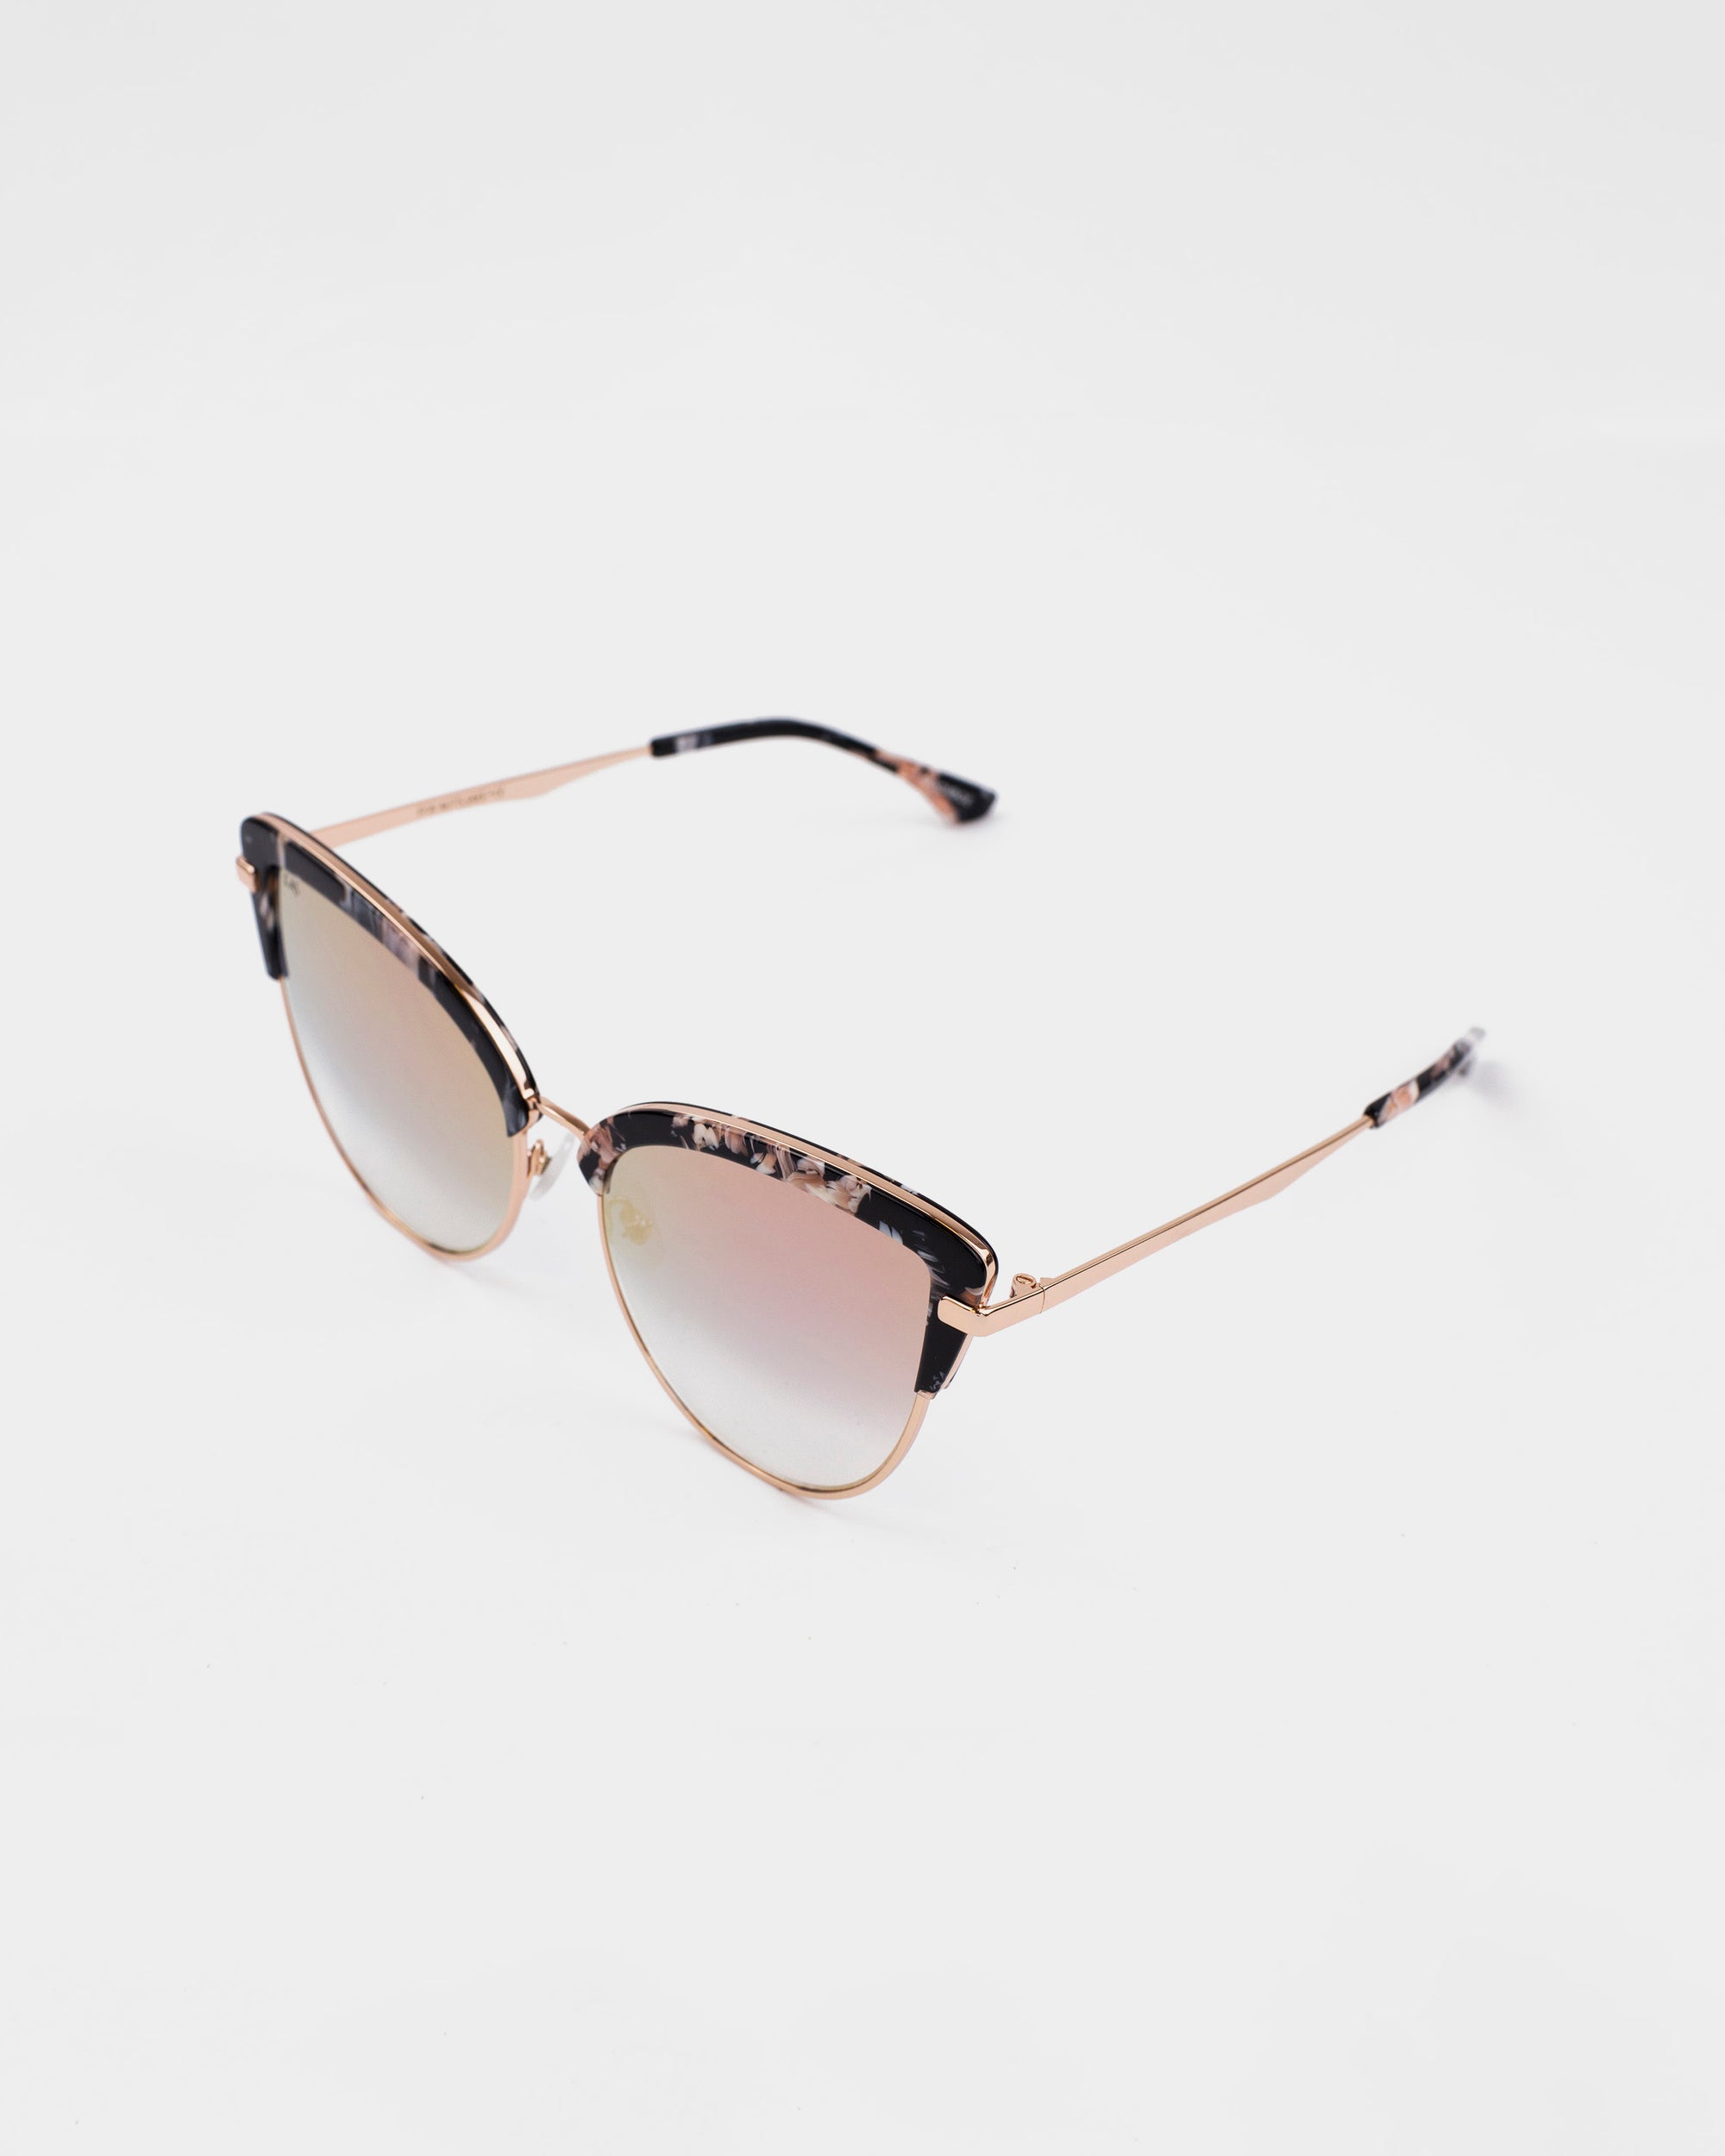 A pair of stylish For Art&#39;s Sake® Venus sunglasses with thin, 18-karat gold-plated frames and gradient nylon lenses transitioning from a darker top to a lighter bottom. The top part of the frames has a tortoiseshell pattern. The For Art&#39;s Sake® Venus sunglasses are placed against a plain white background.